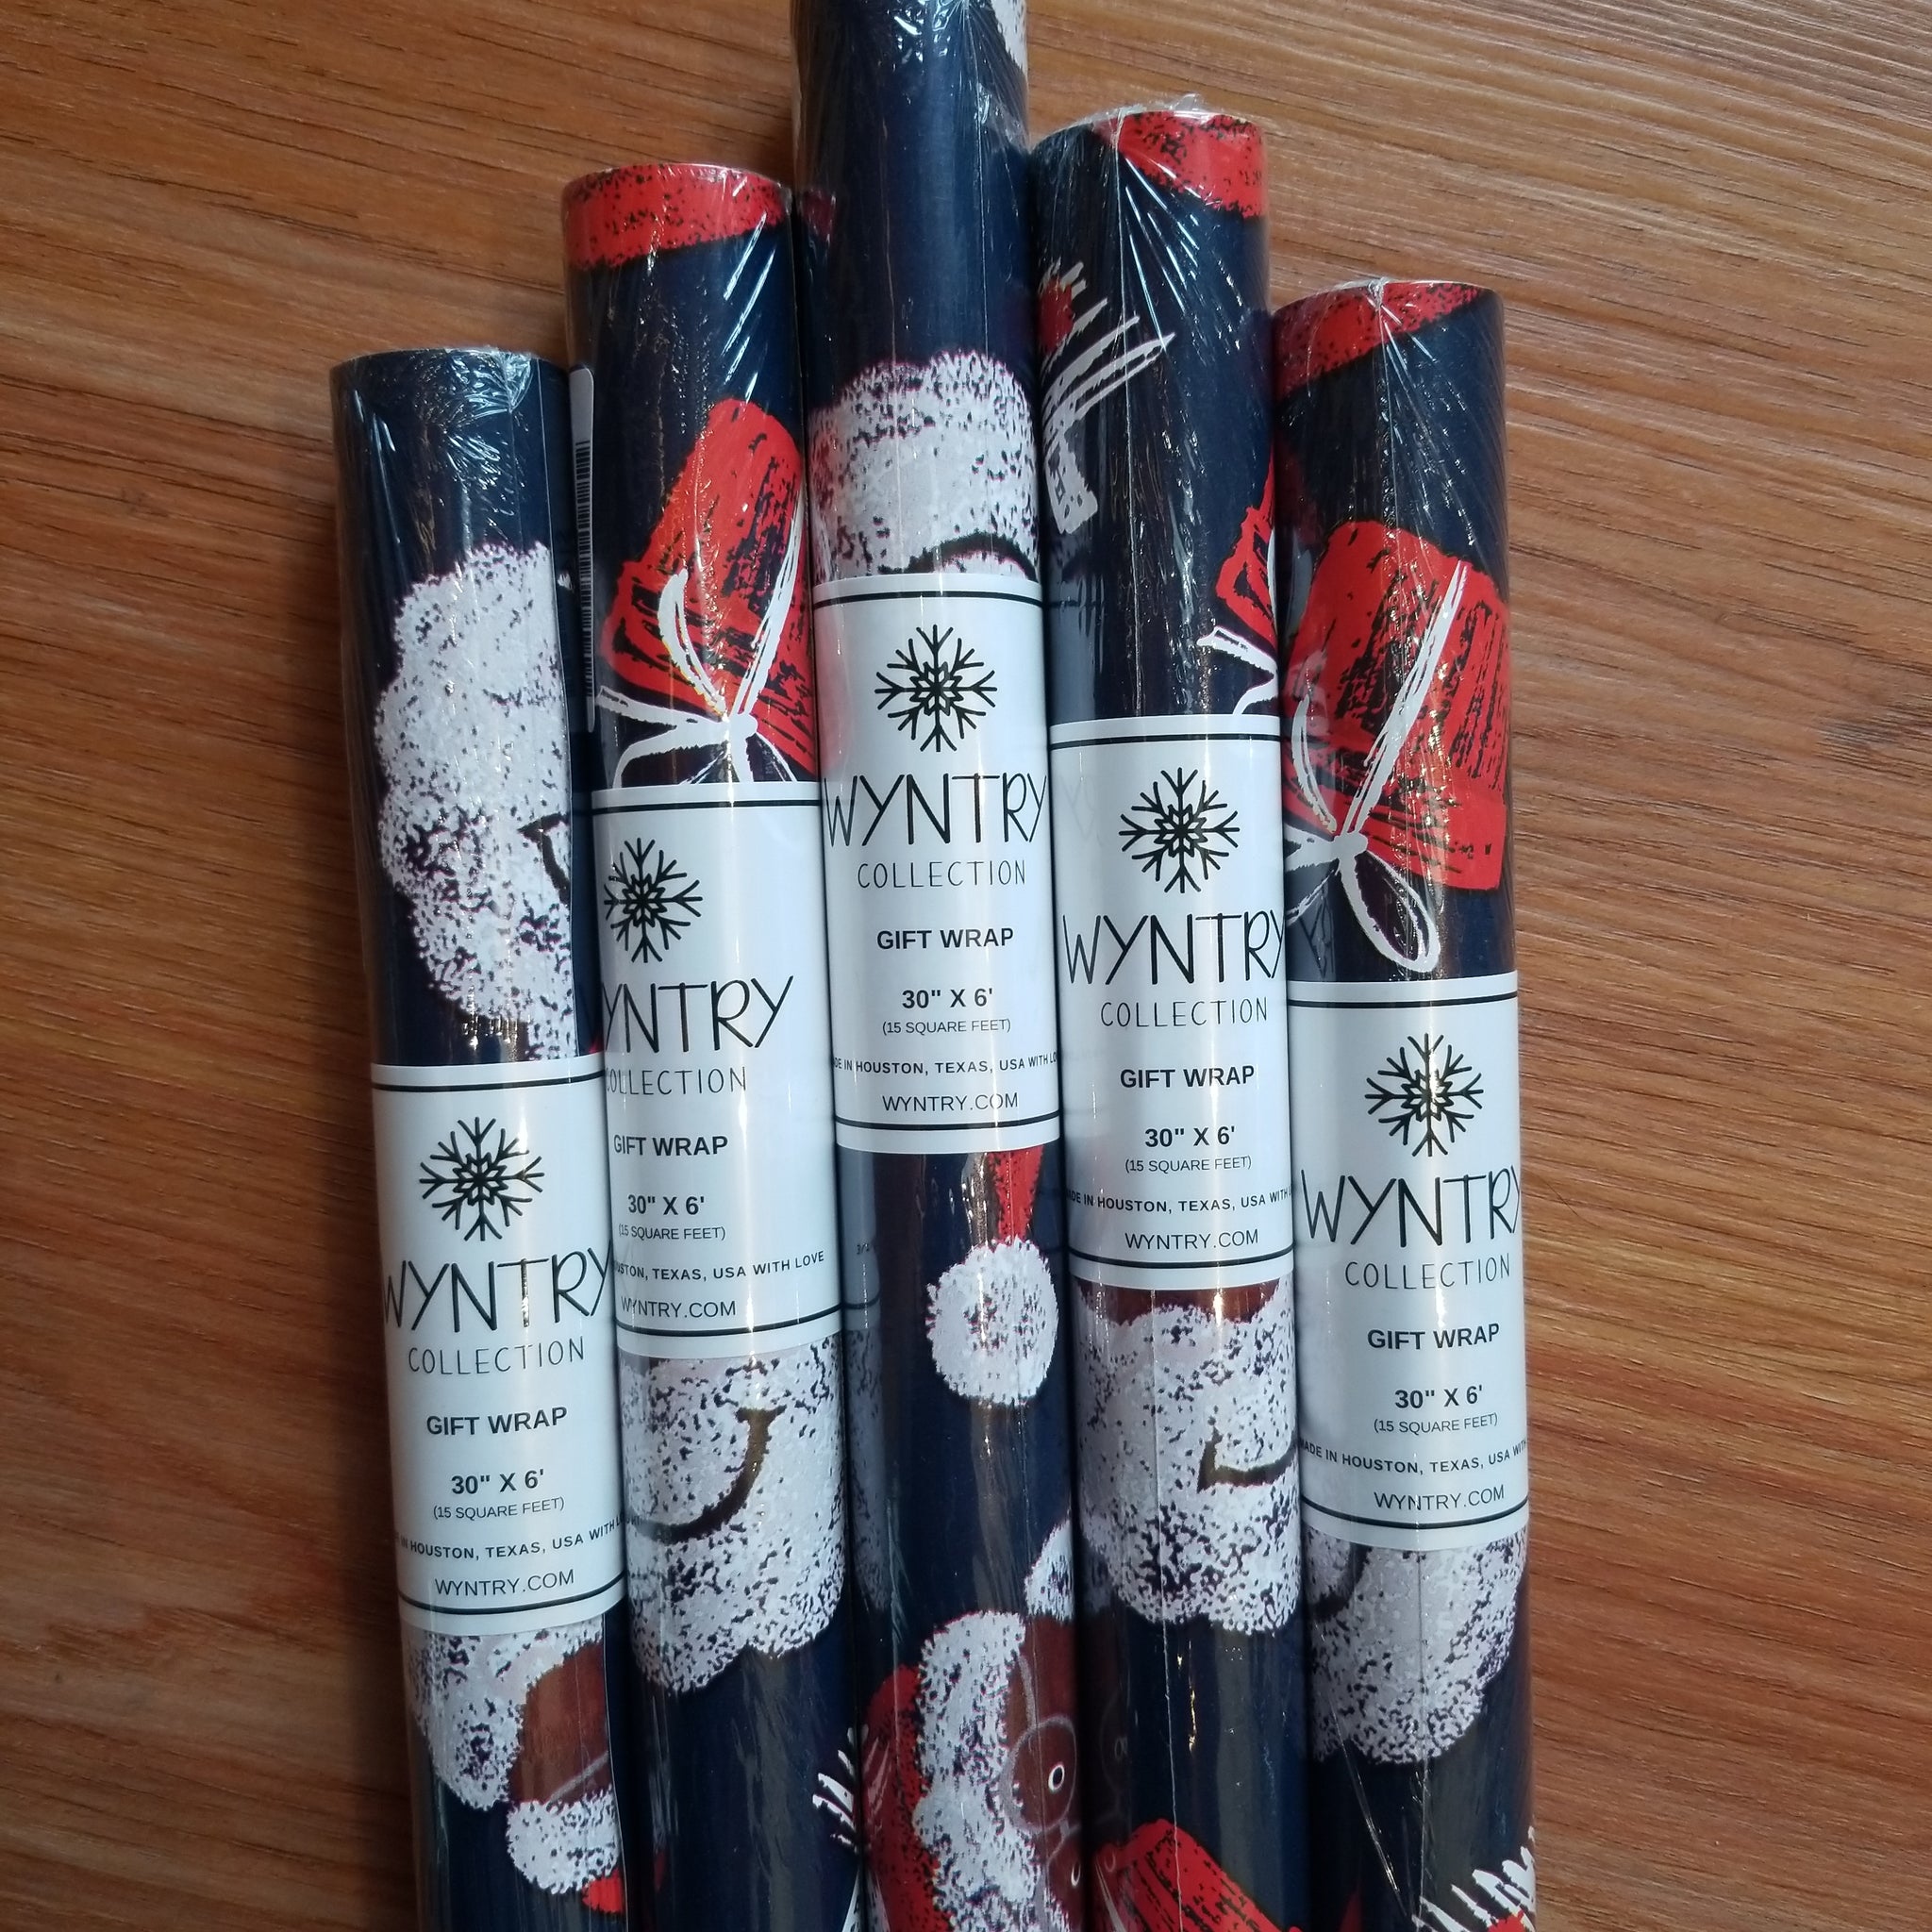 Wyntry Collection Gift Wrap